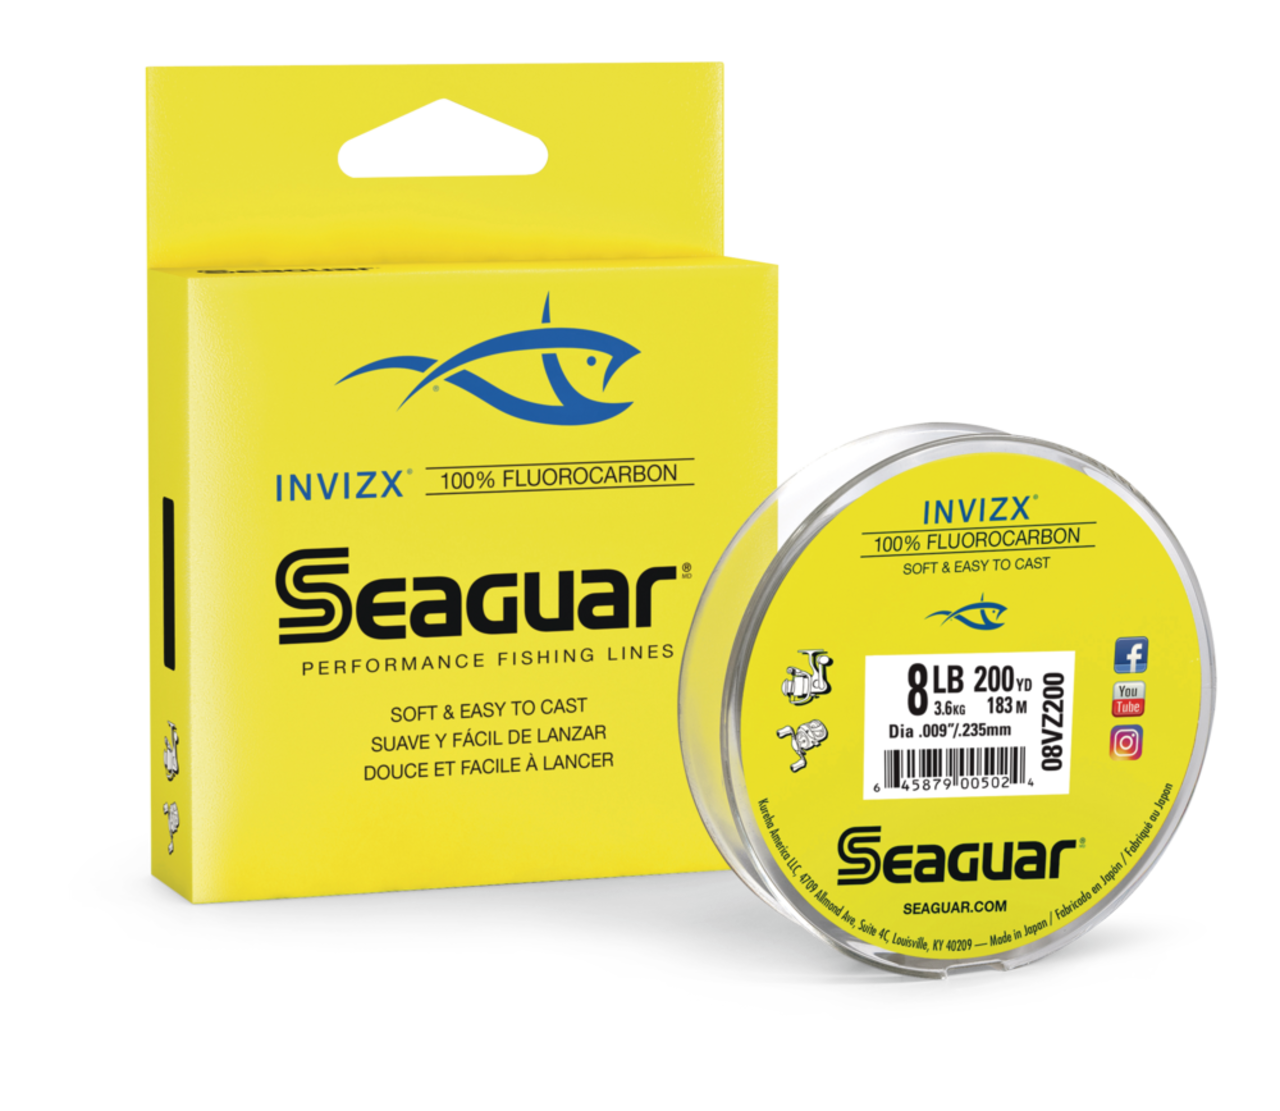 https://media-www.canadiantire.ca/product/playing/fishing/fishing-accessories/1783741/seaguar-invizx-200yd-8lb-2ee21953-353f-4733-8df1-abcf902b4a54.png?imdensity=1&imwidth=1244&impolicy=mZoom